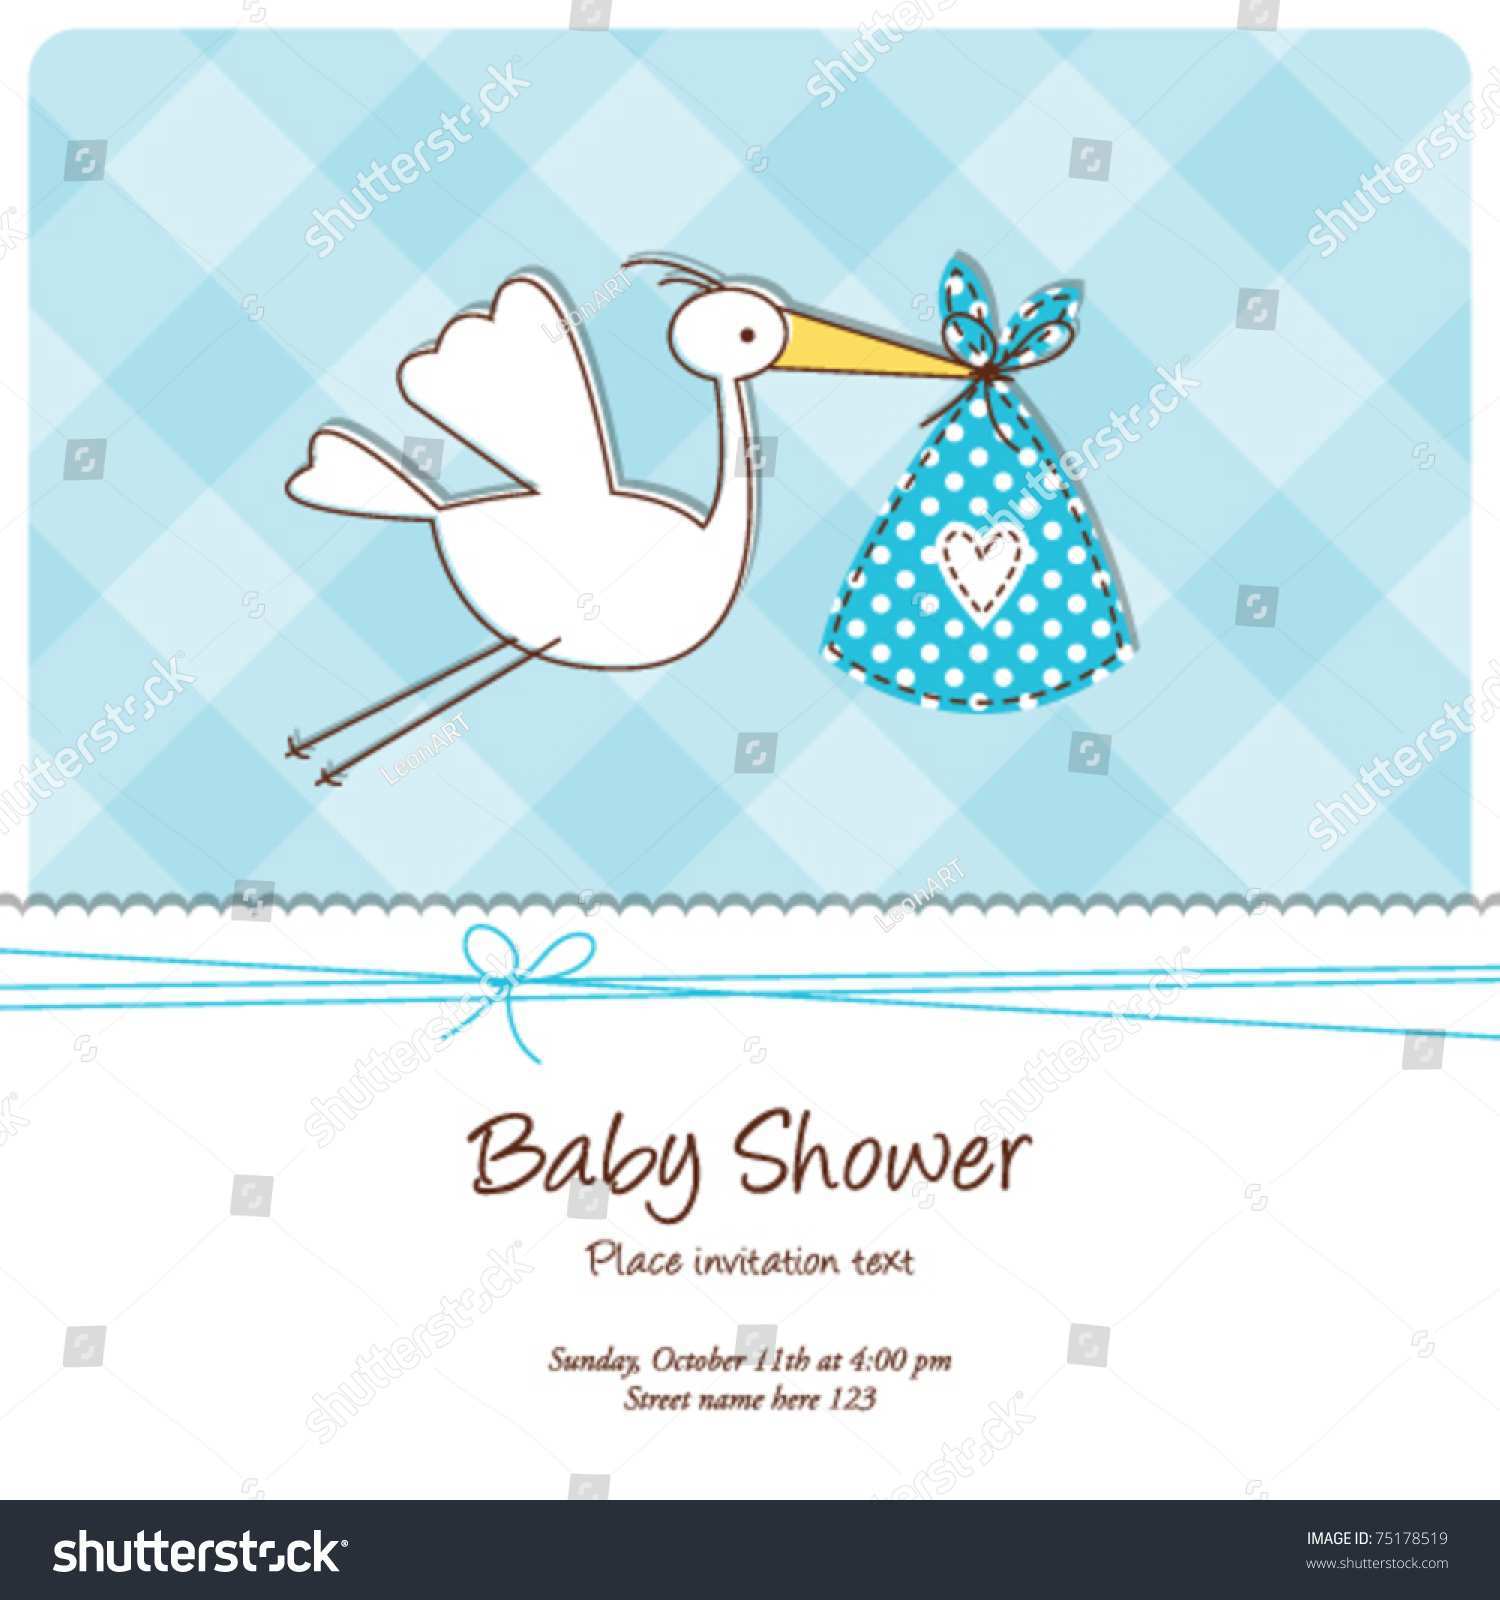 33 Customize Baby Shower Invitation Template Vector Now for Baby Shower Invitation Template Vector